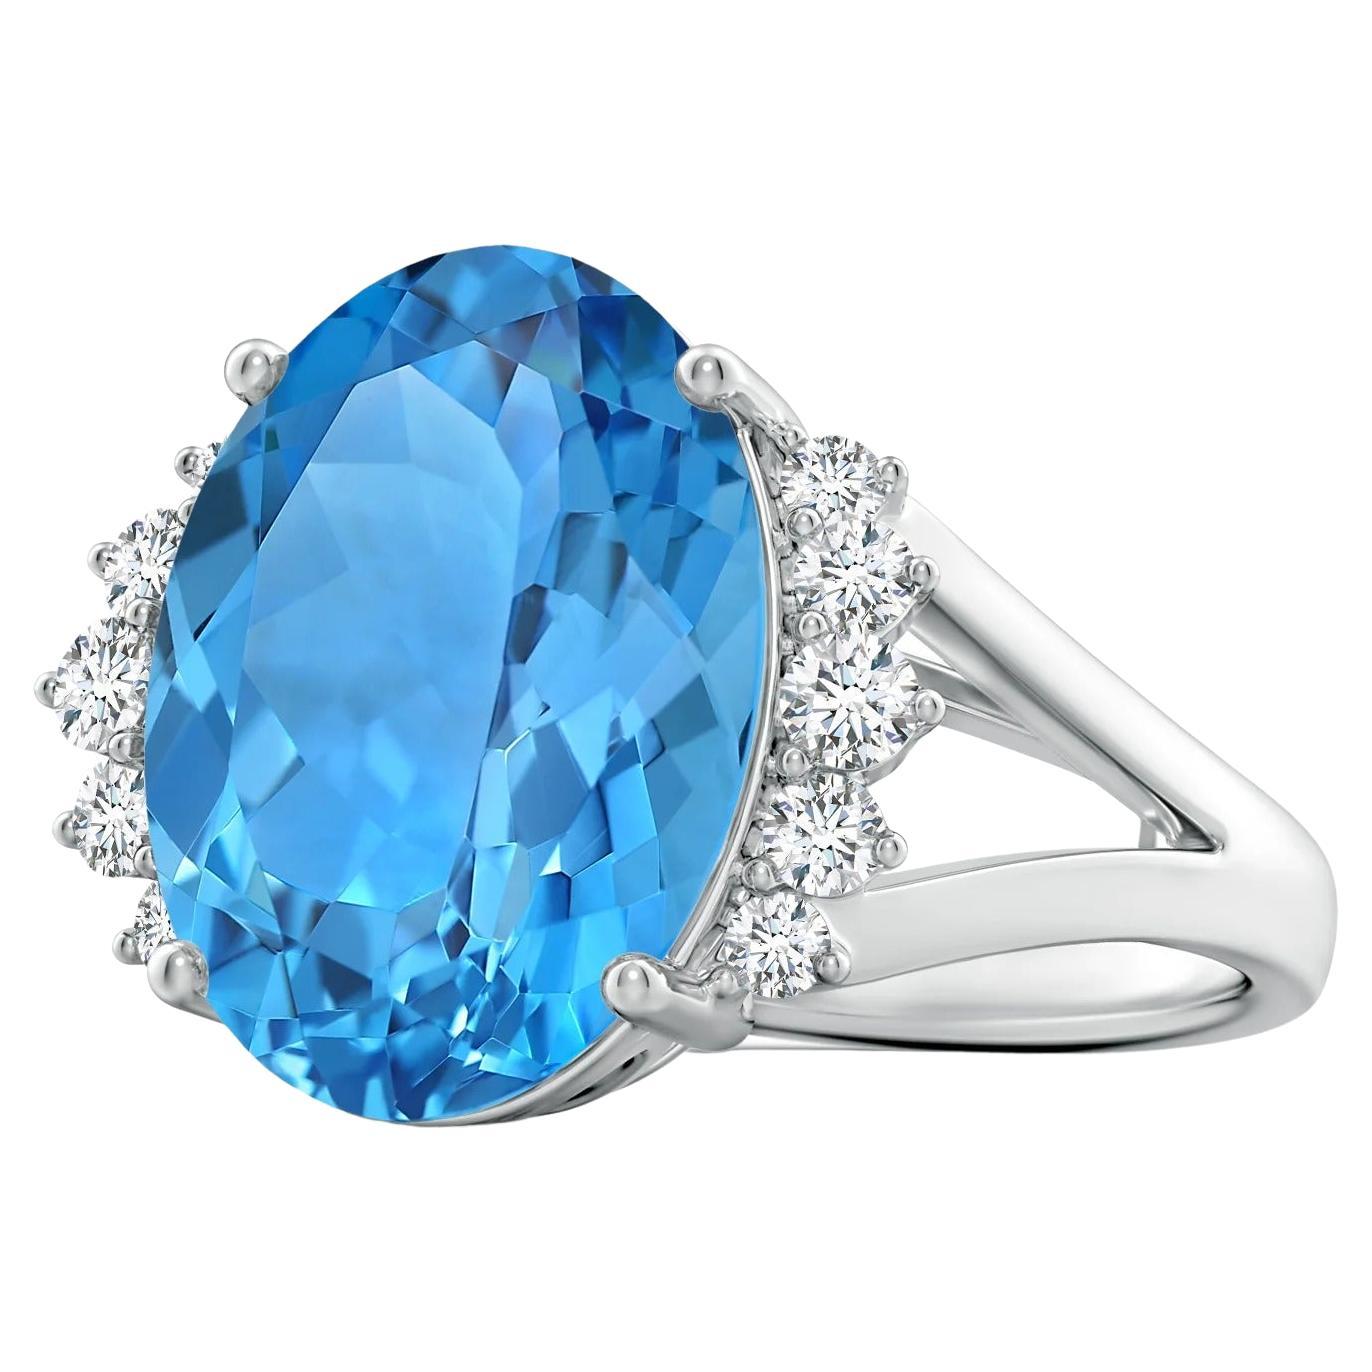 For Sale:  ANGARA GIA Certified Natural Swiss Blue Topaz Ring in White Gold with Diamonds